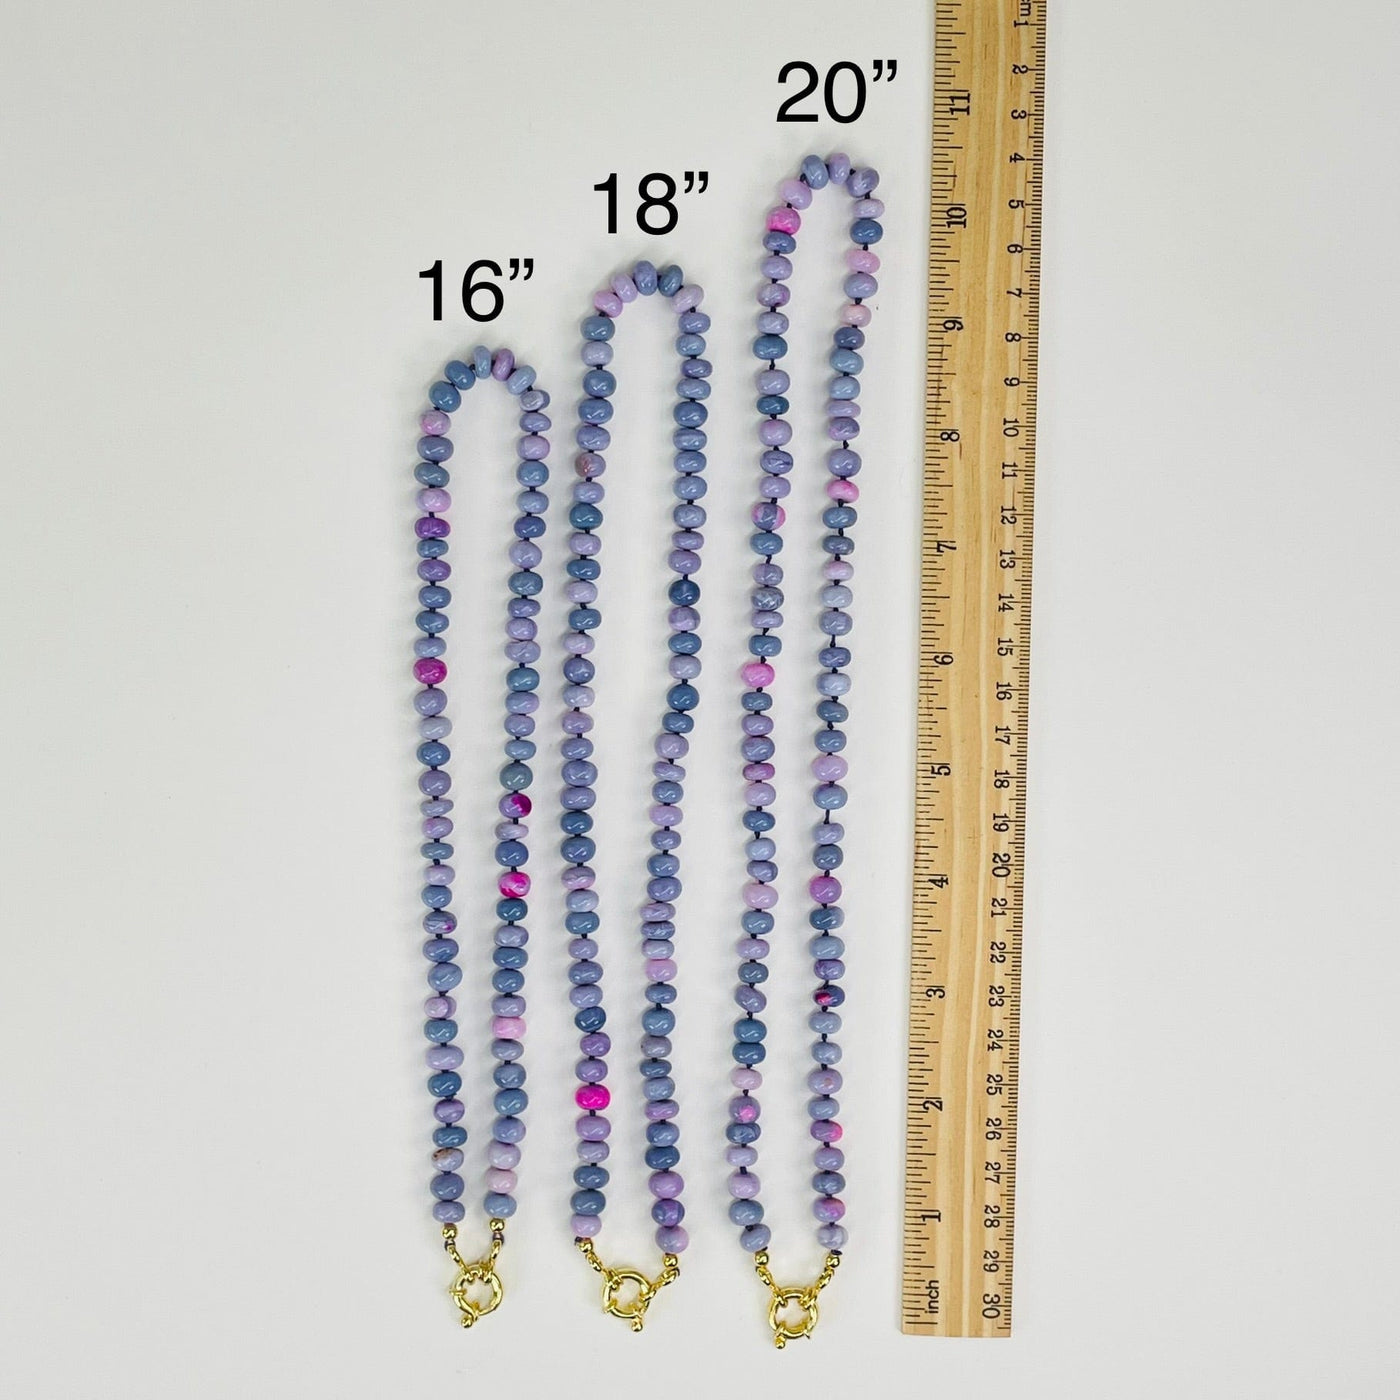 candy necklaces available in 16", 18", and 20" lengths 